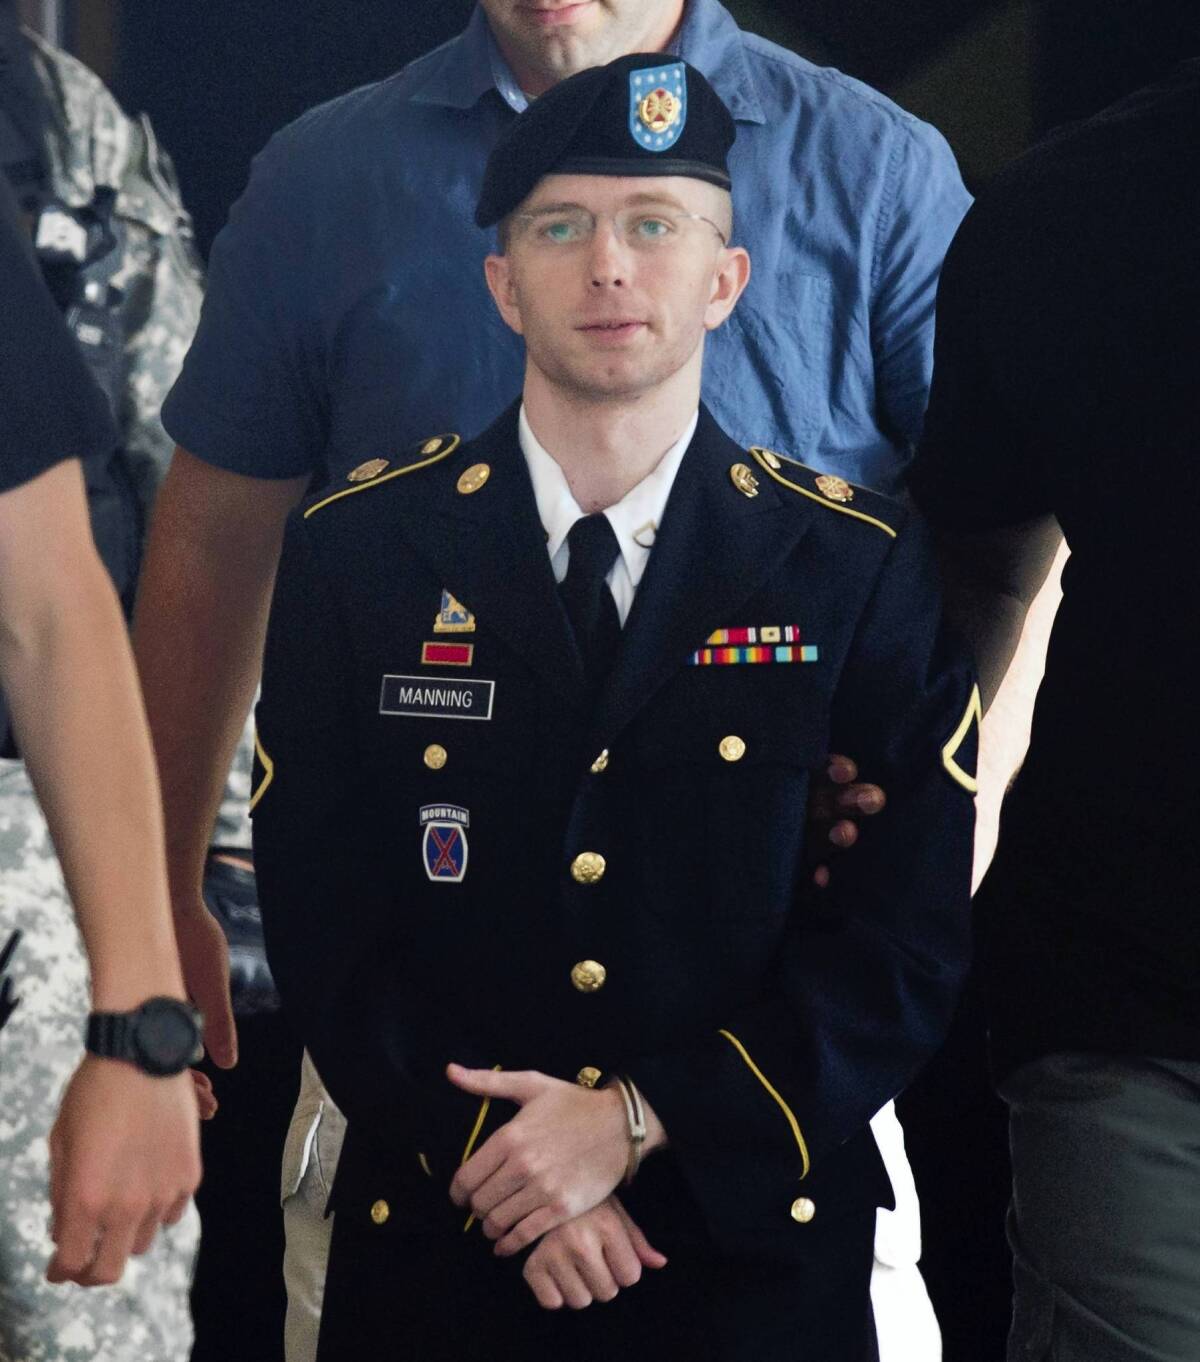 Army Pfc. Bradley Manning could face a maximum of 90 years in prison, with no possibility of parole for 30 years. The judge in his court-martial will begin considering the matter Tuesday.